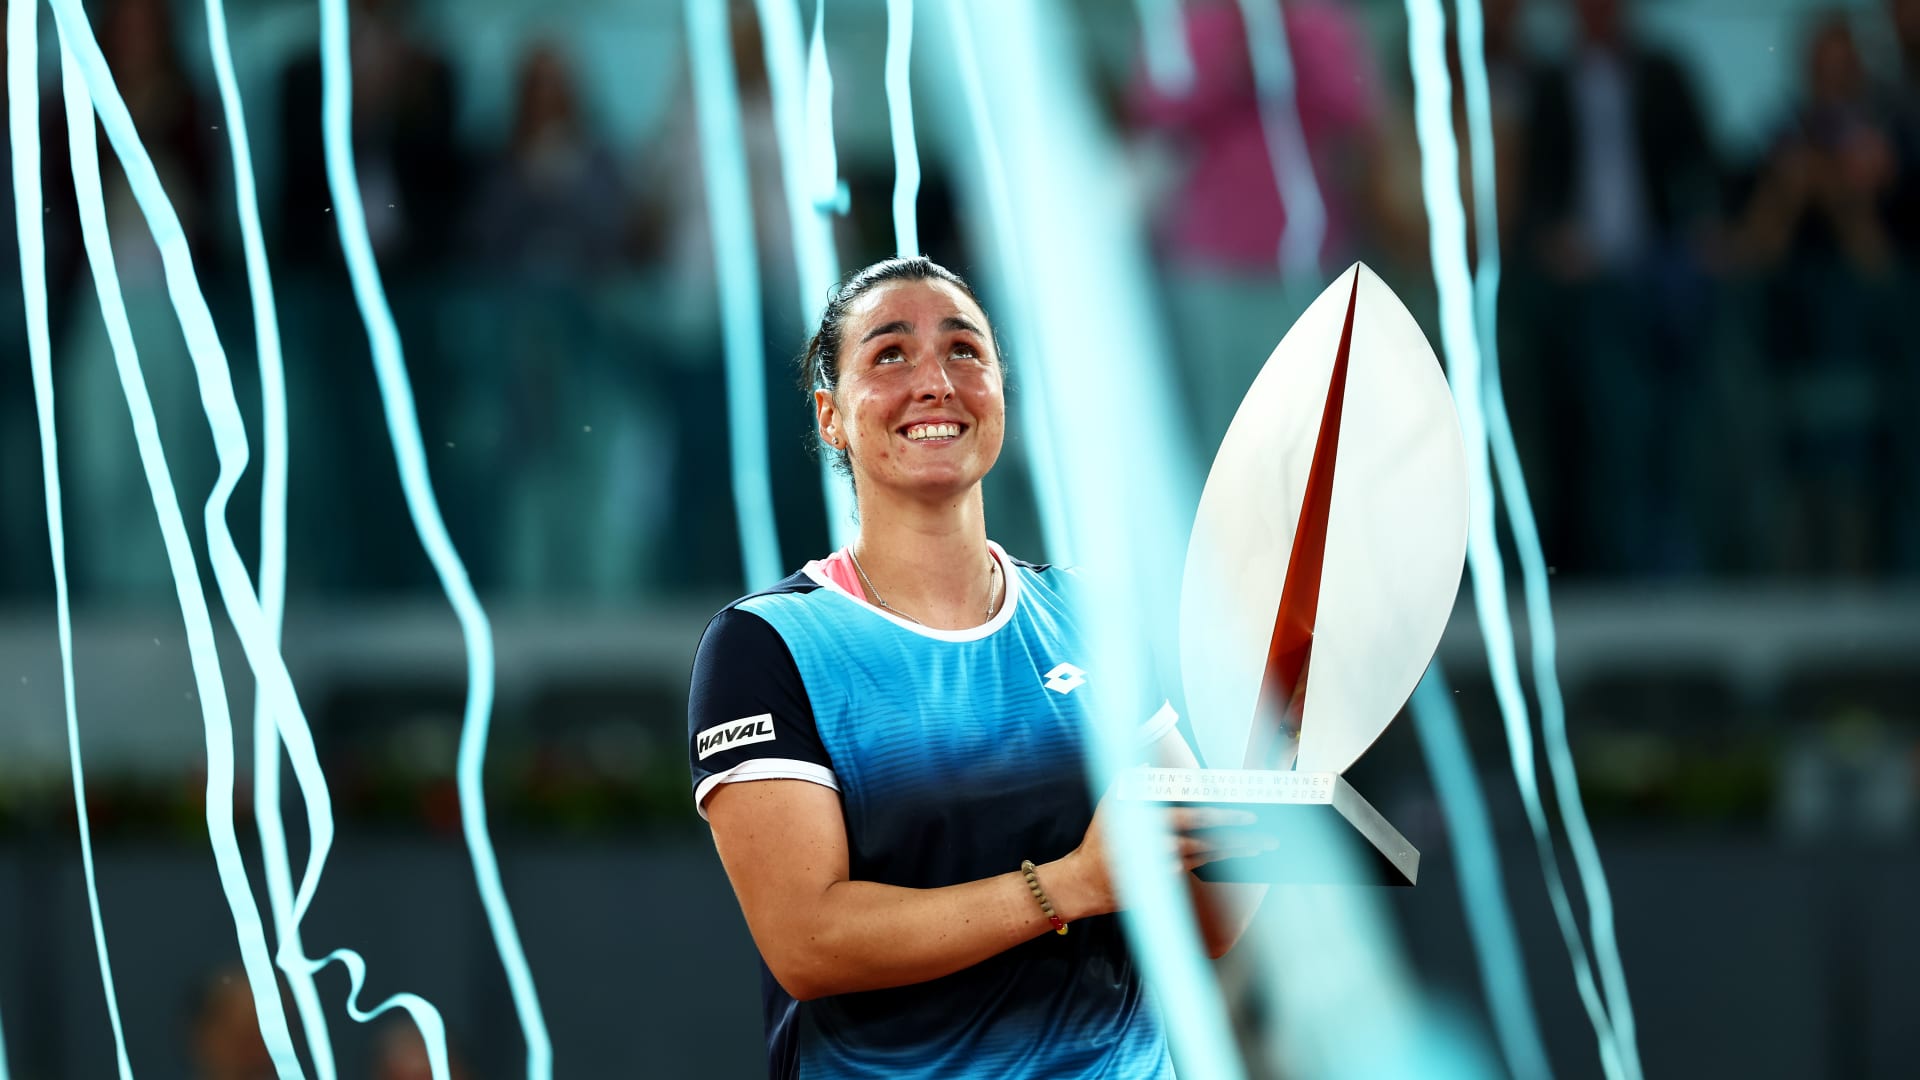 Tunisia’s Ons Jabeur wins Madrid Open title, her greatest feast of all times